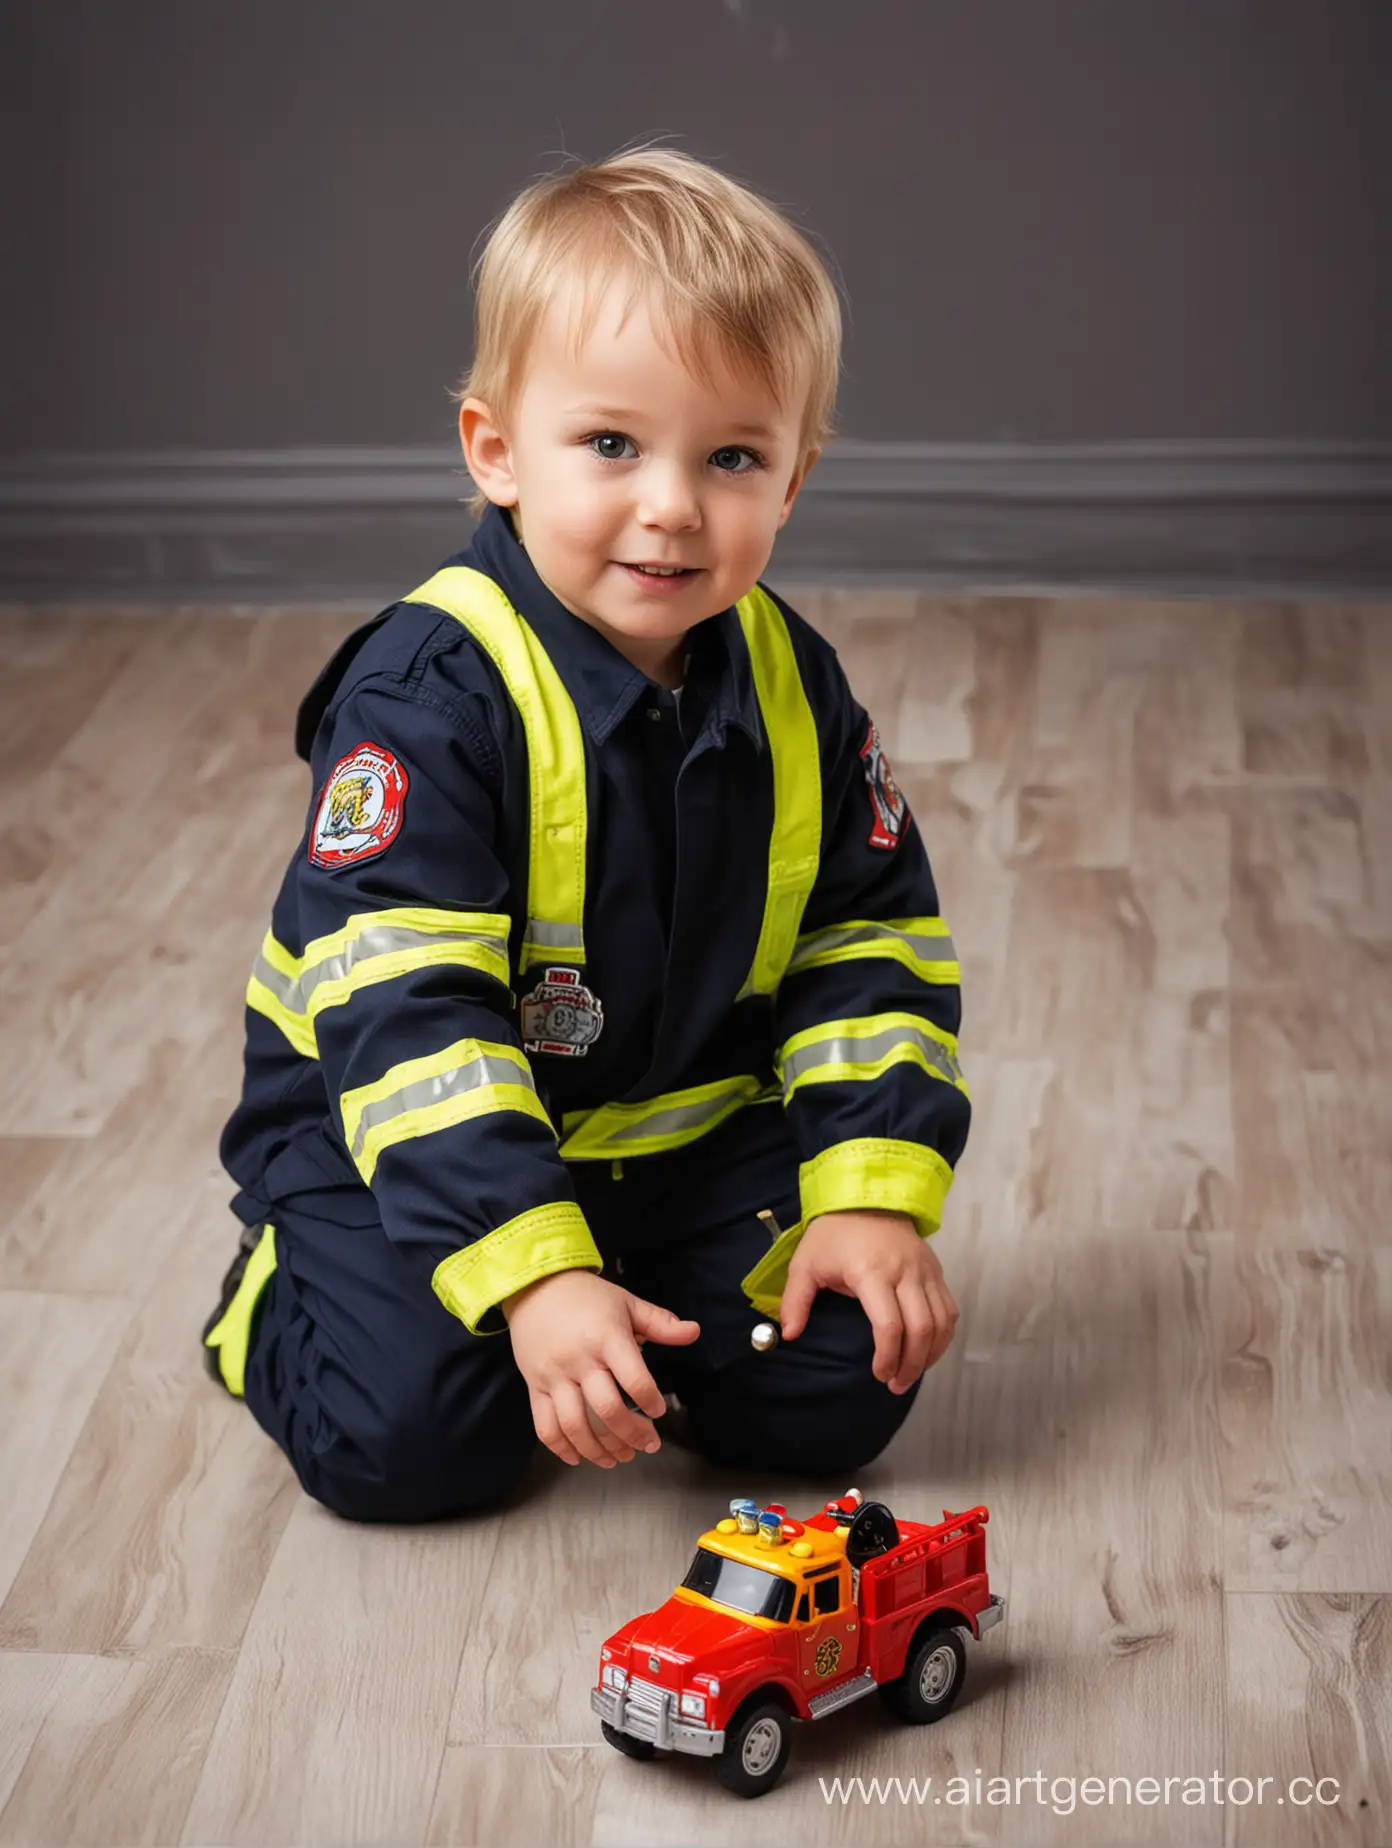 little boy in a firefighter costume squats and plays with toy cars on the floor